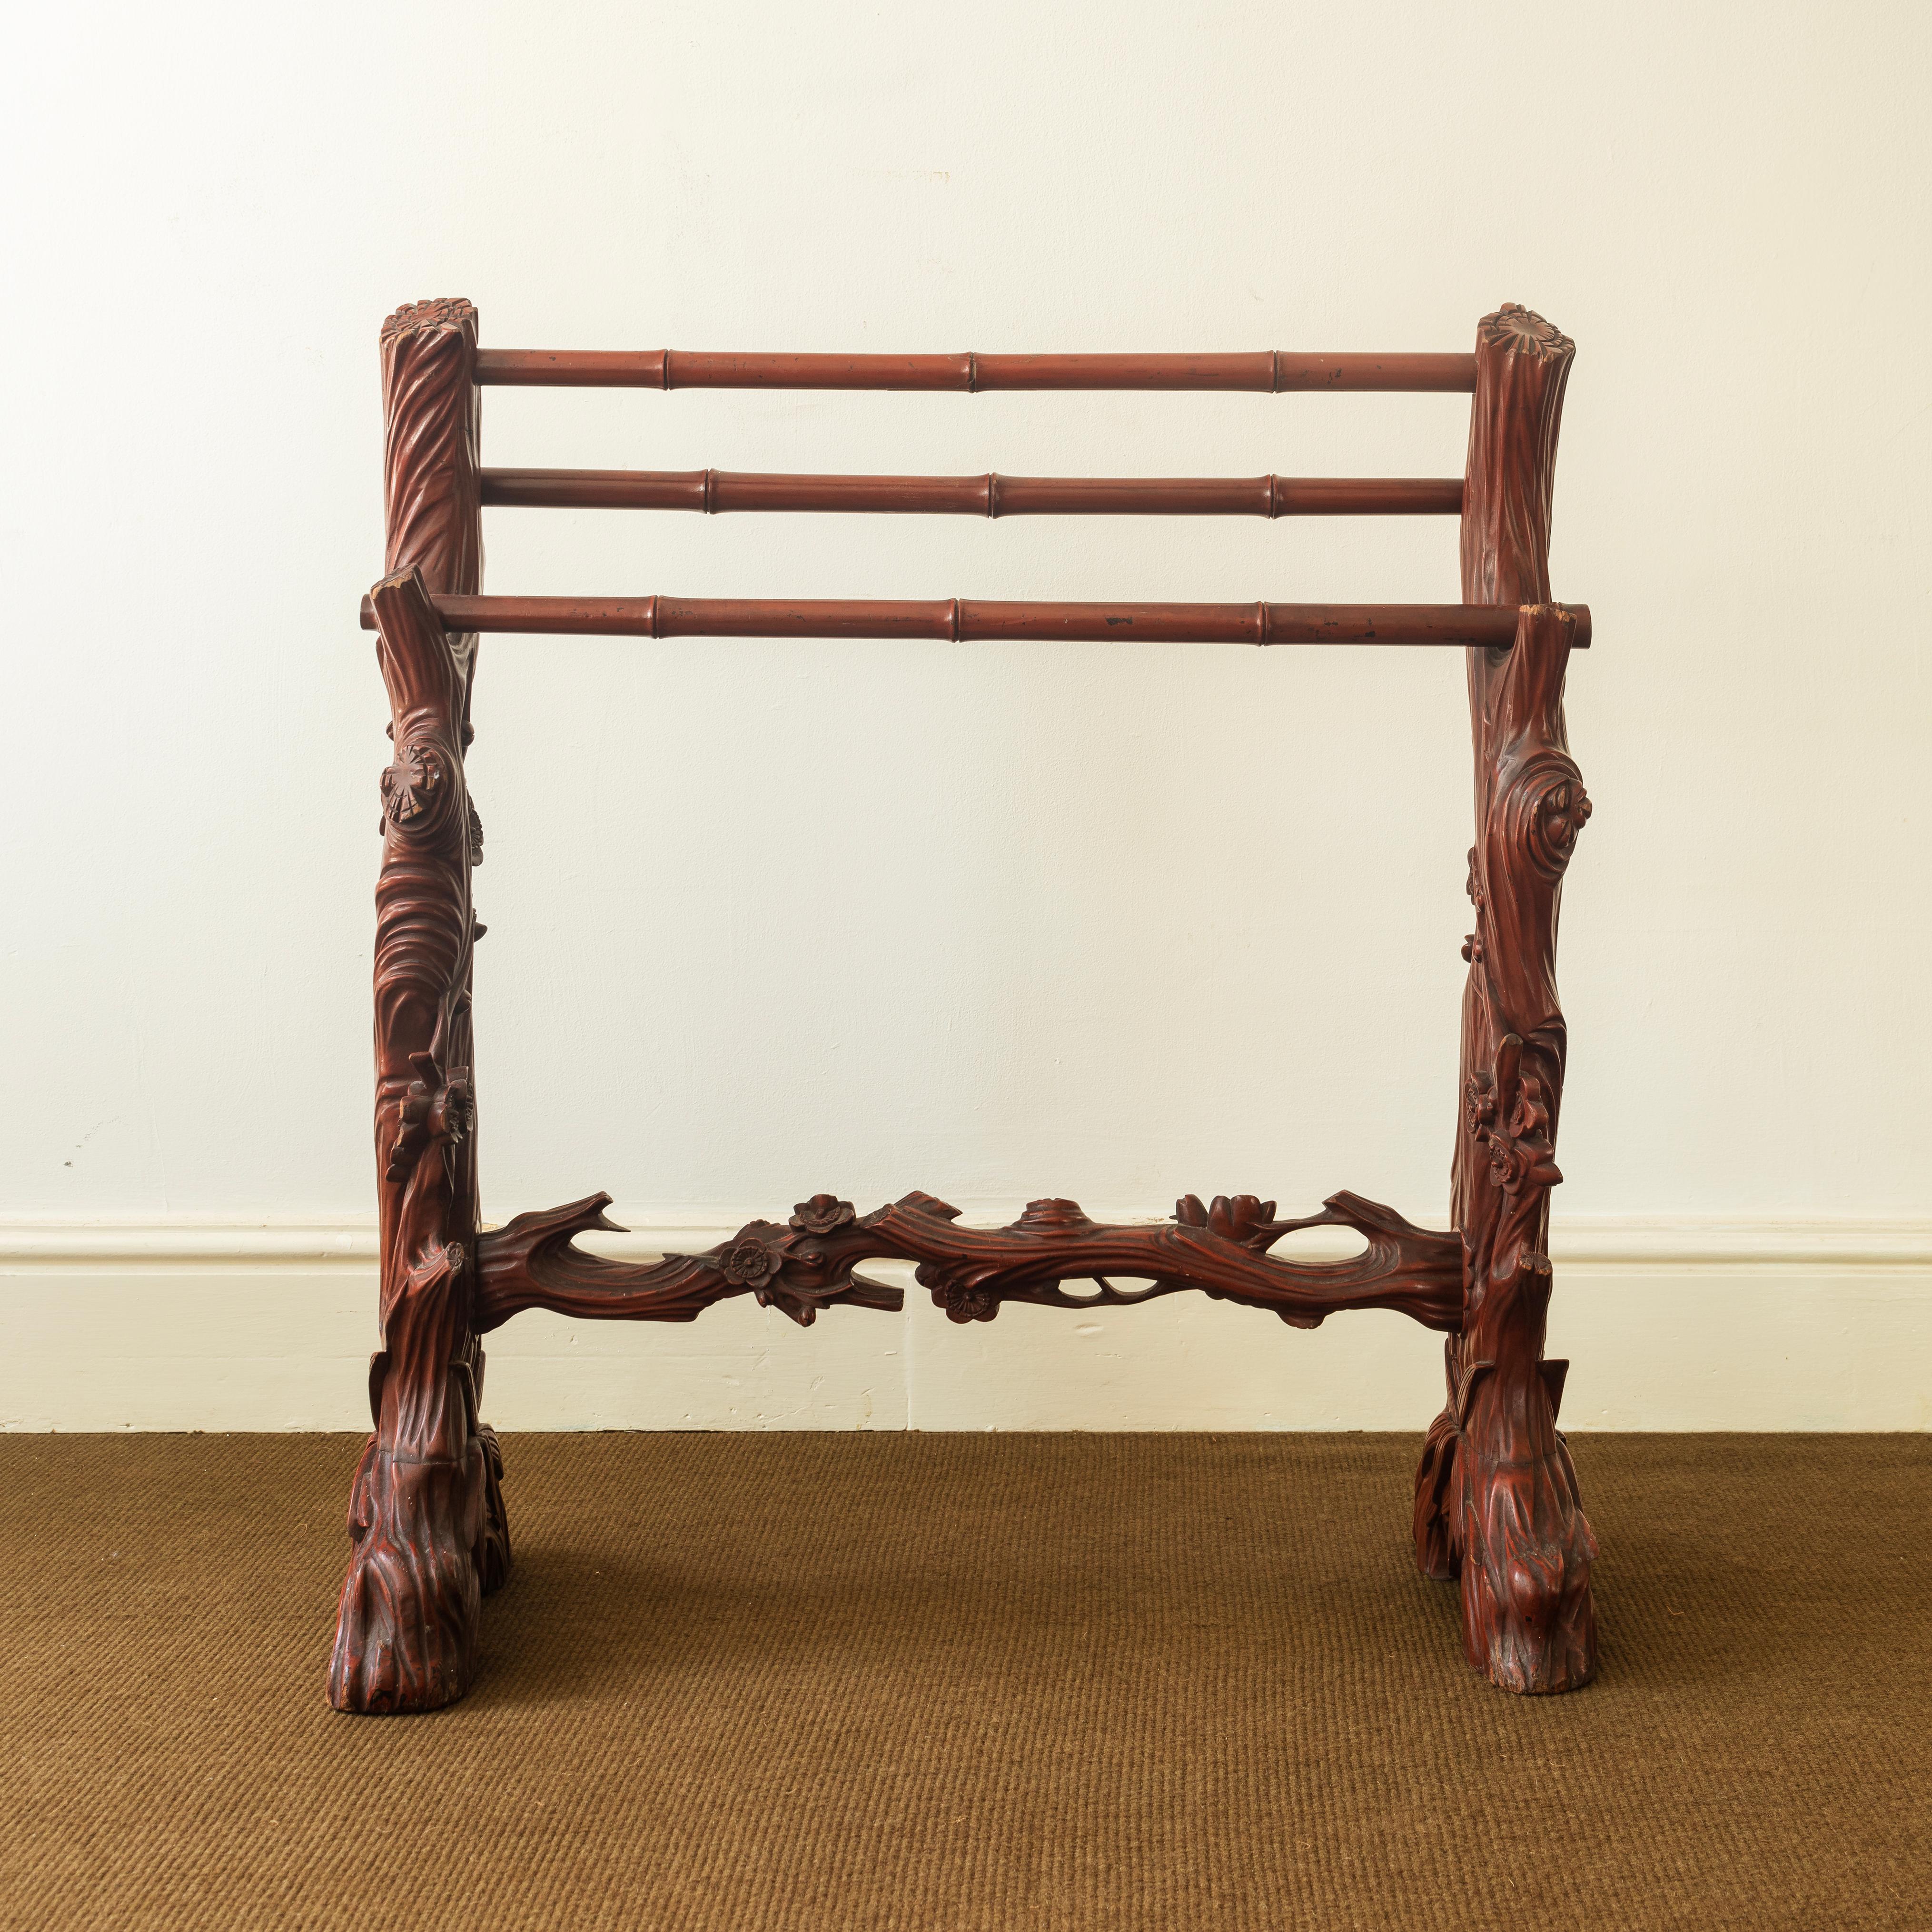 A towel or clothes rail presumably made for a Chinoiserie bathroom, the rails carved to simulate bamboo, the ends with flowering prunus and bark. An unusual, decorative and useful piece of furniture.
English 1920s 

Size: 85 x 80 cms